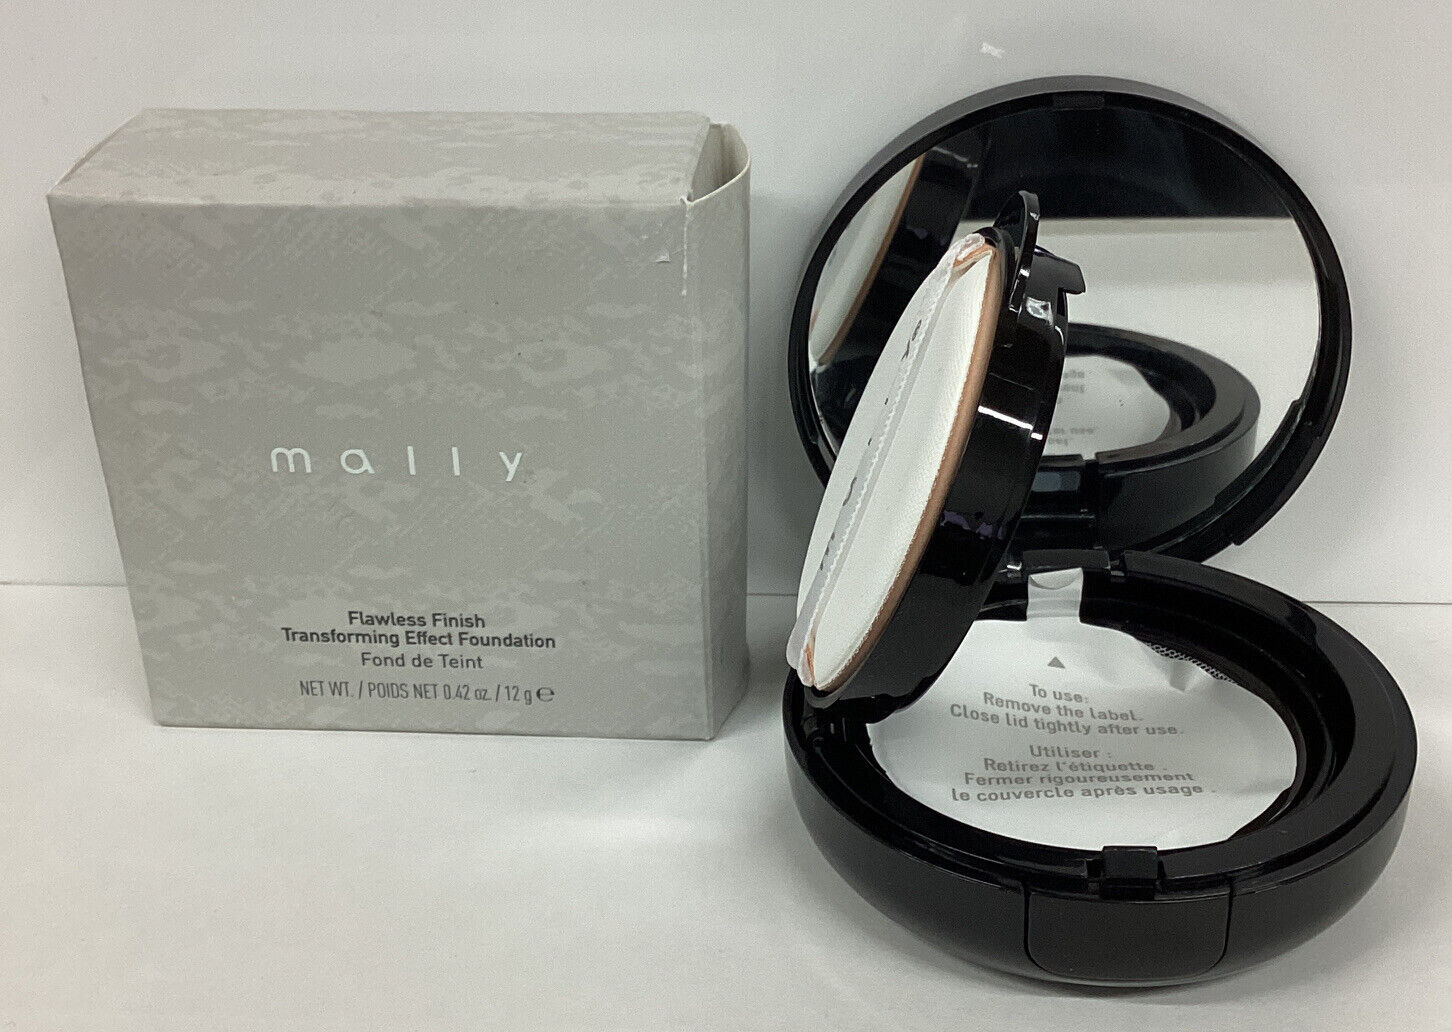 Mally Flawless Finish Effect Foundation MEDIUM 0.42oz As Pictured